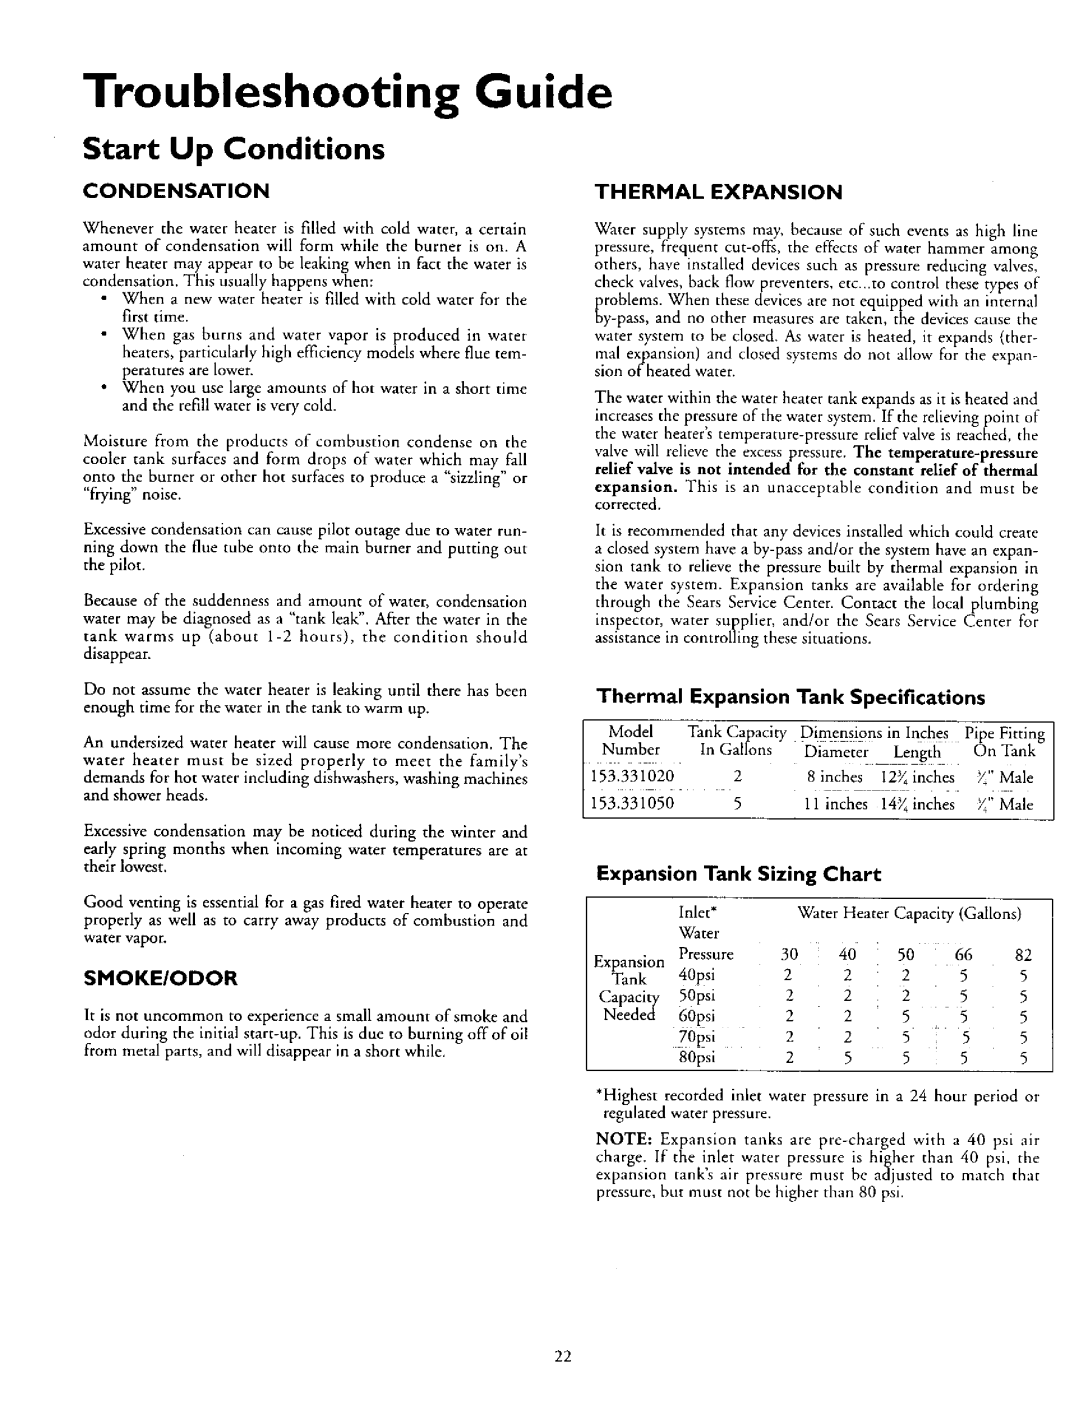 Kenmore 153.332463 Troubleshooting Guide, Start Up Conditions, Condensation, Thermal Expansion, Expansion Tank, Sizing 